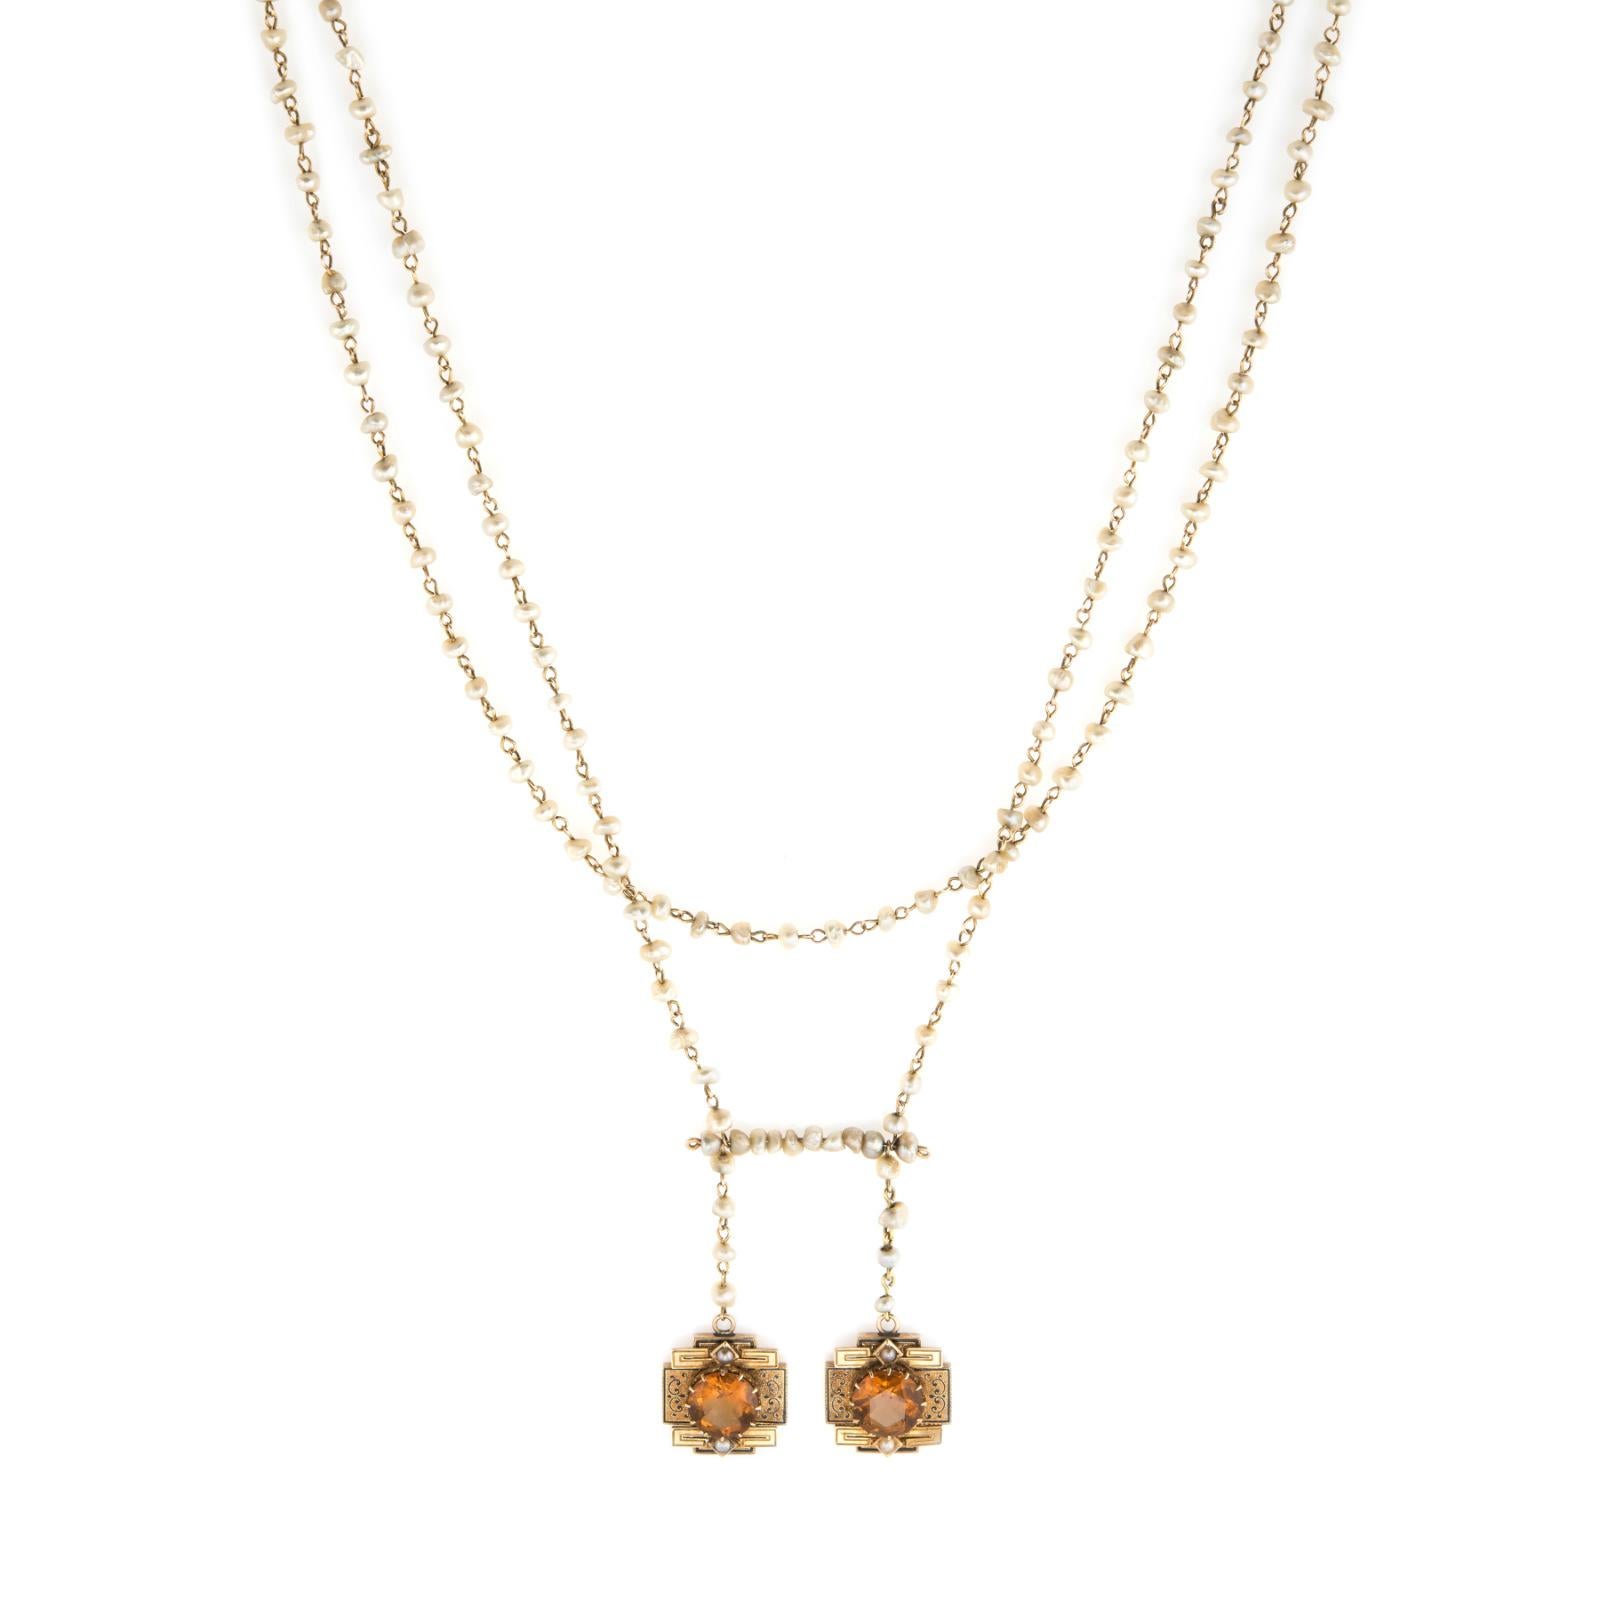 Elegant and finely detailed antique necklace (circa 1880s to 1900s), crafted in 14 karat yellow gold.  

Two faceted round cut citrines each measure 10mm (estimated at 3.50 carats each - 7 carats total estimated weight). The natural freeform seed